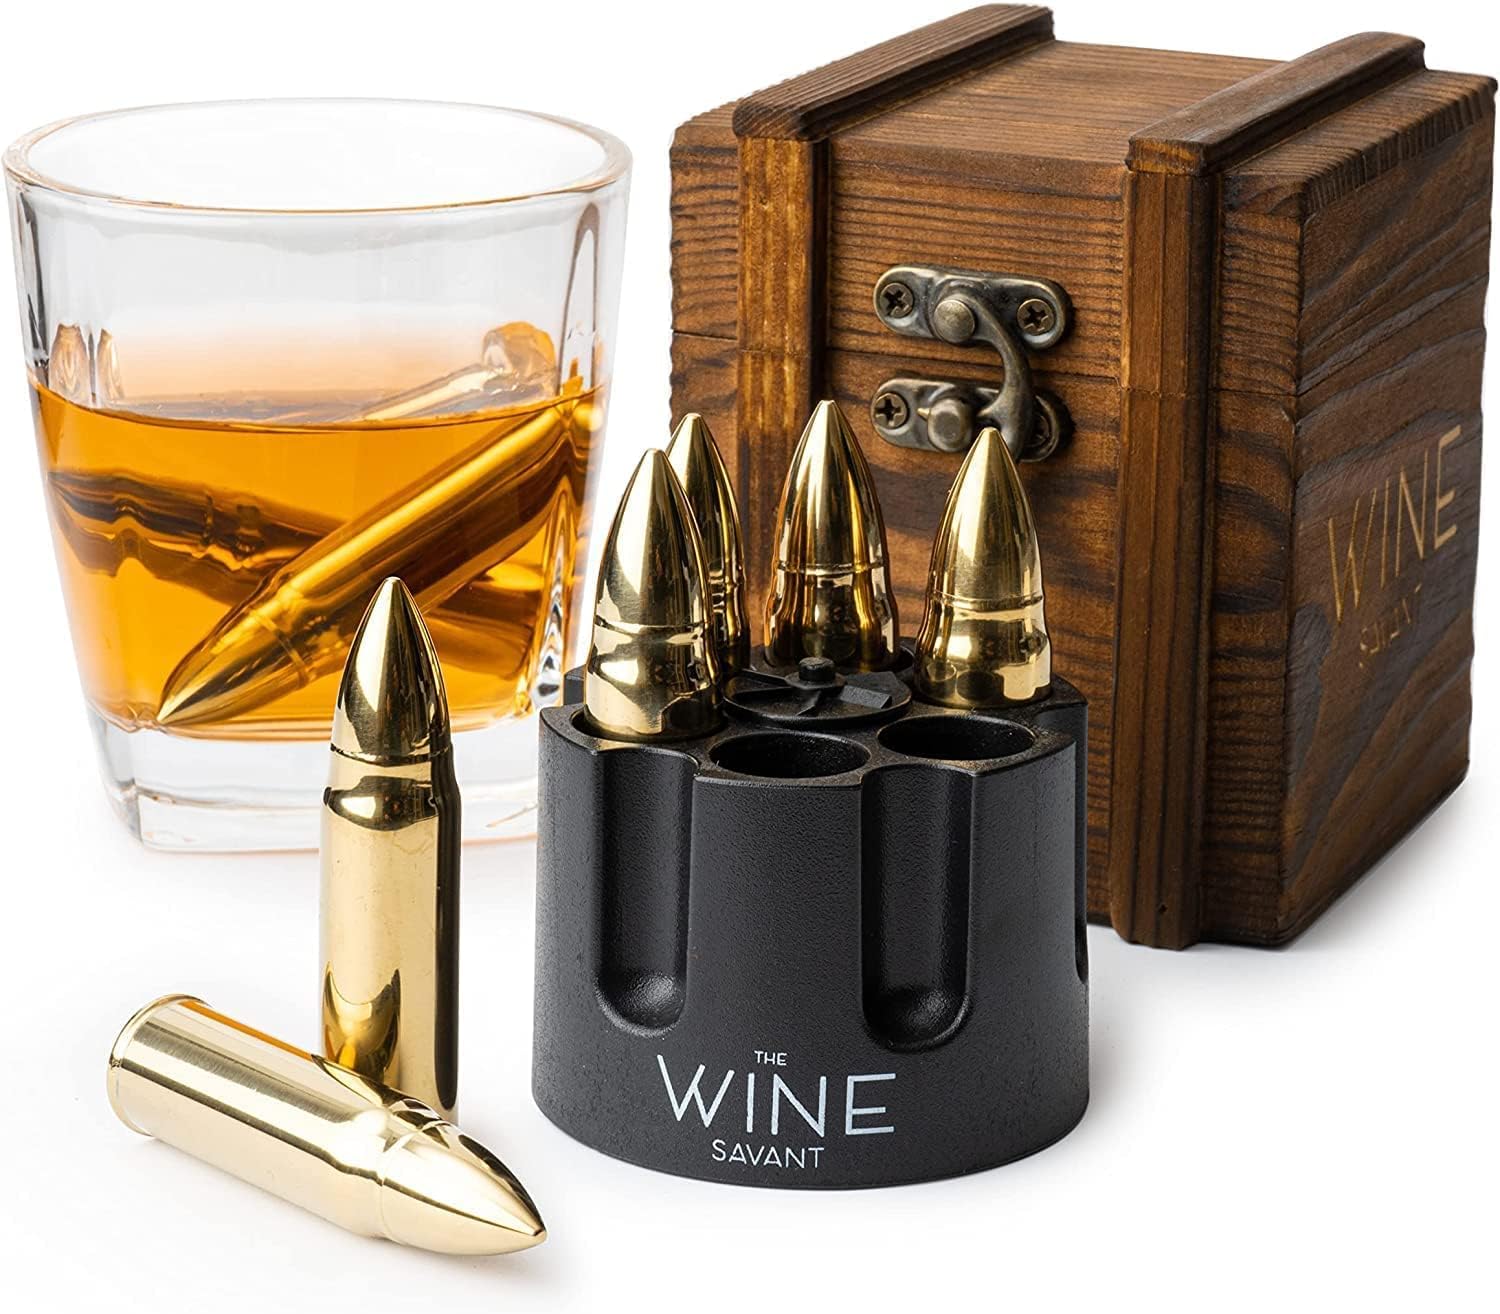 Whiskey Glasses And Bullet Whiskey Stones Set In Unique Ammo Box